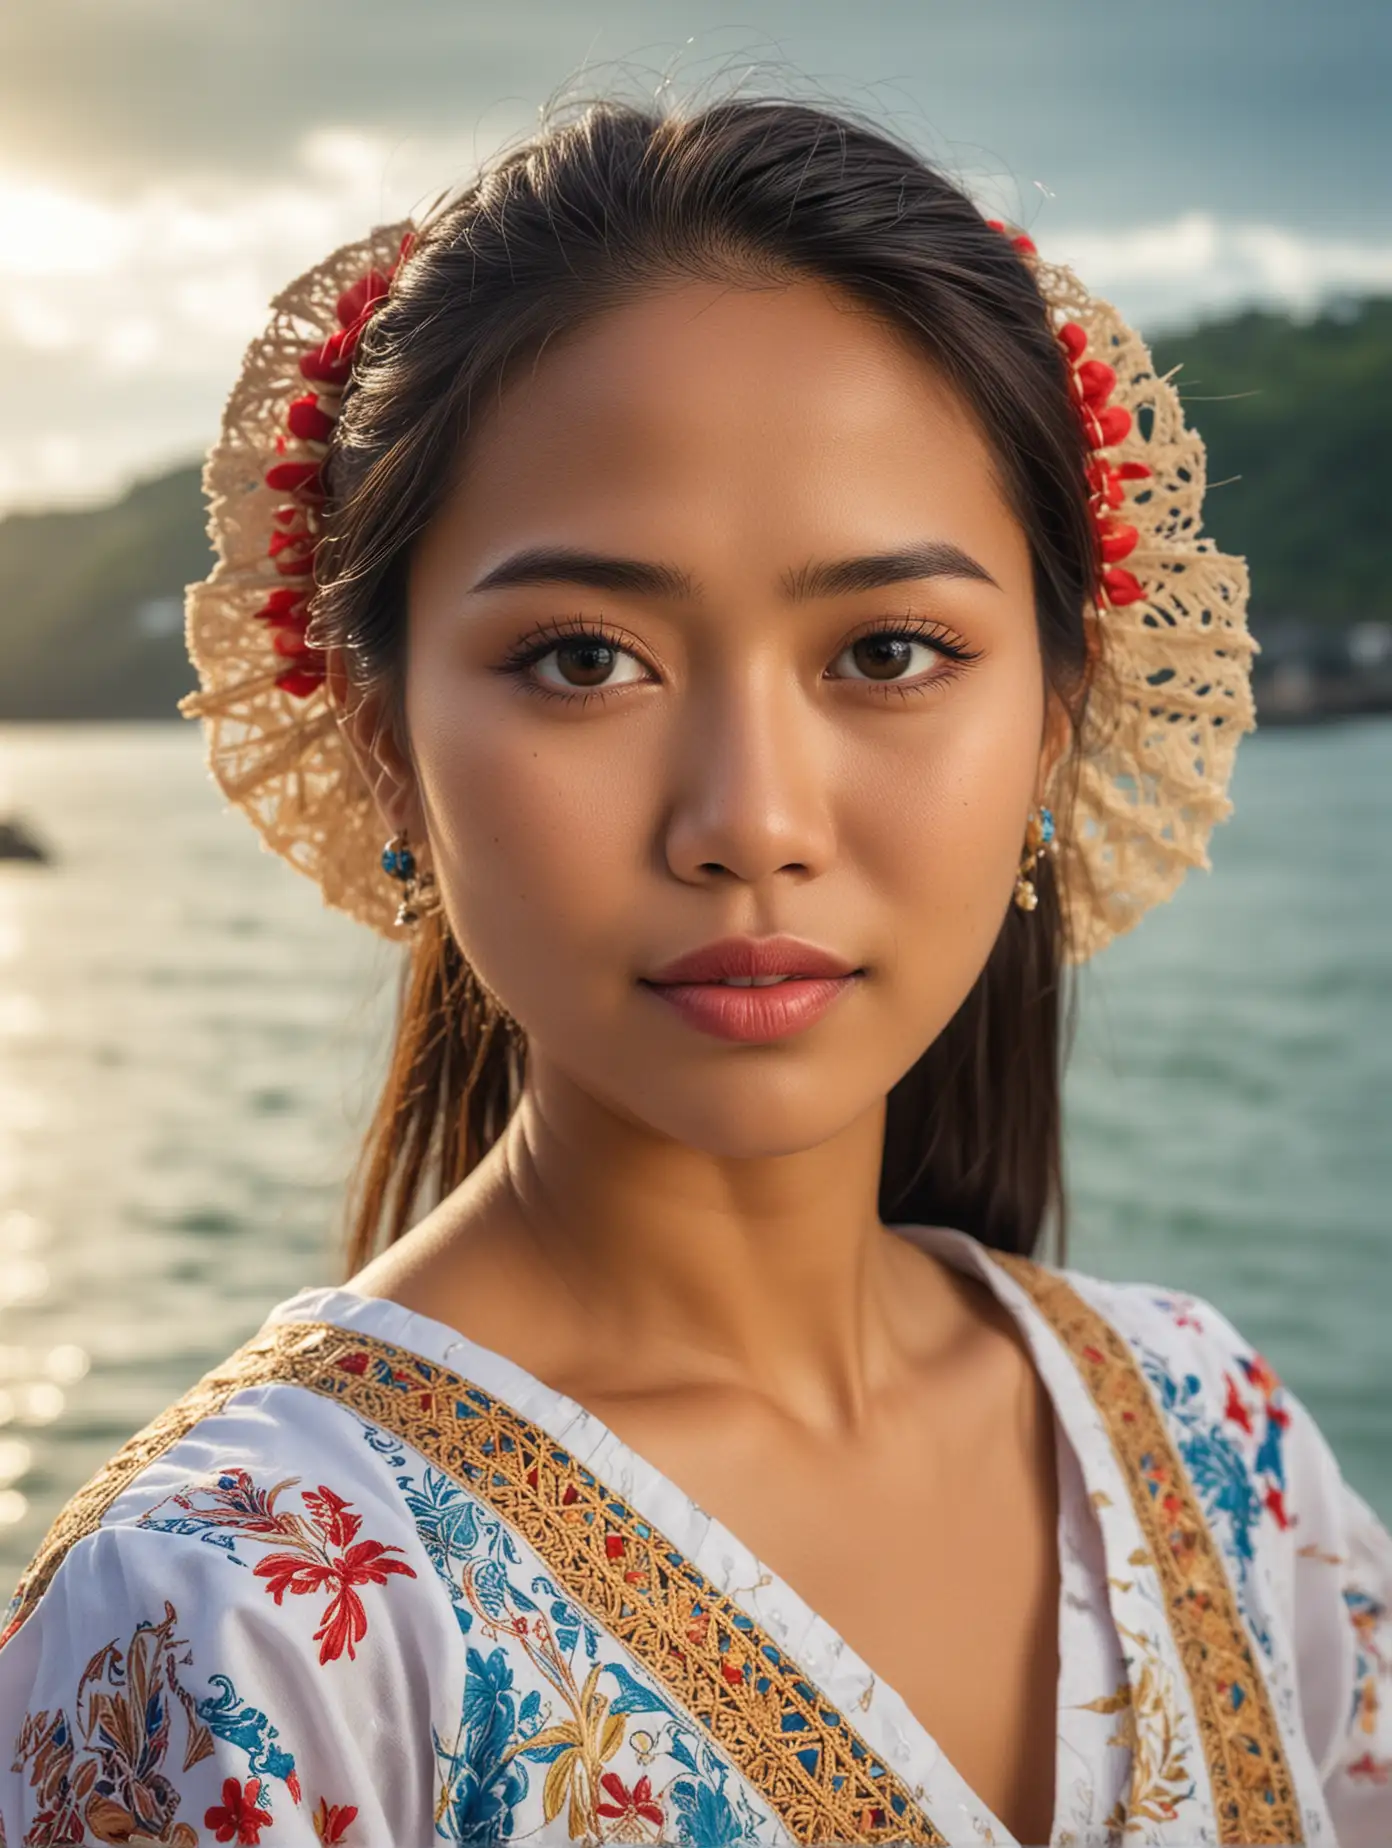 Exquisite Filipina Woman in Traditional Attire on Seaside Island